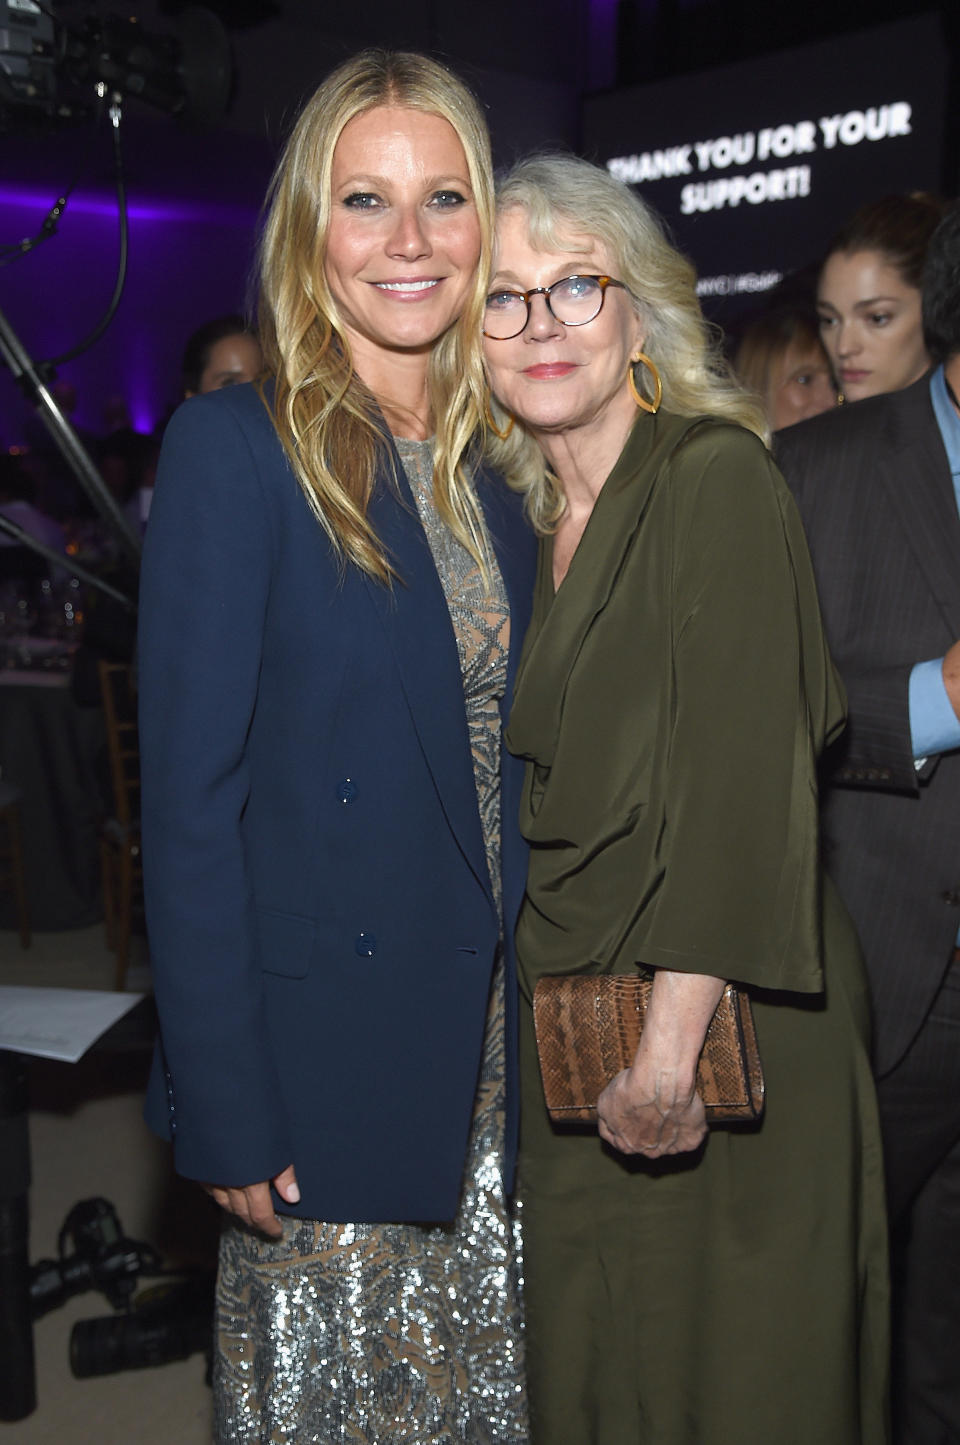 Gwyneth Paltrow and Blythe Danner at an event